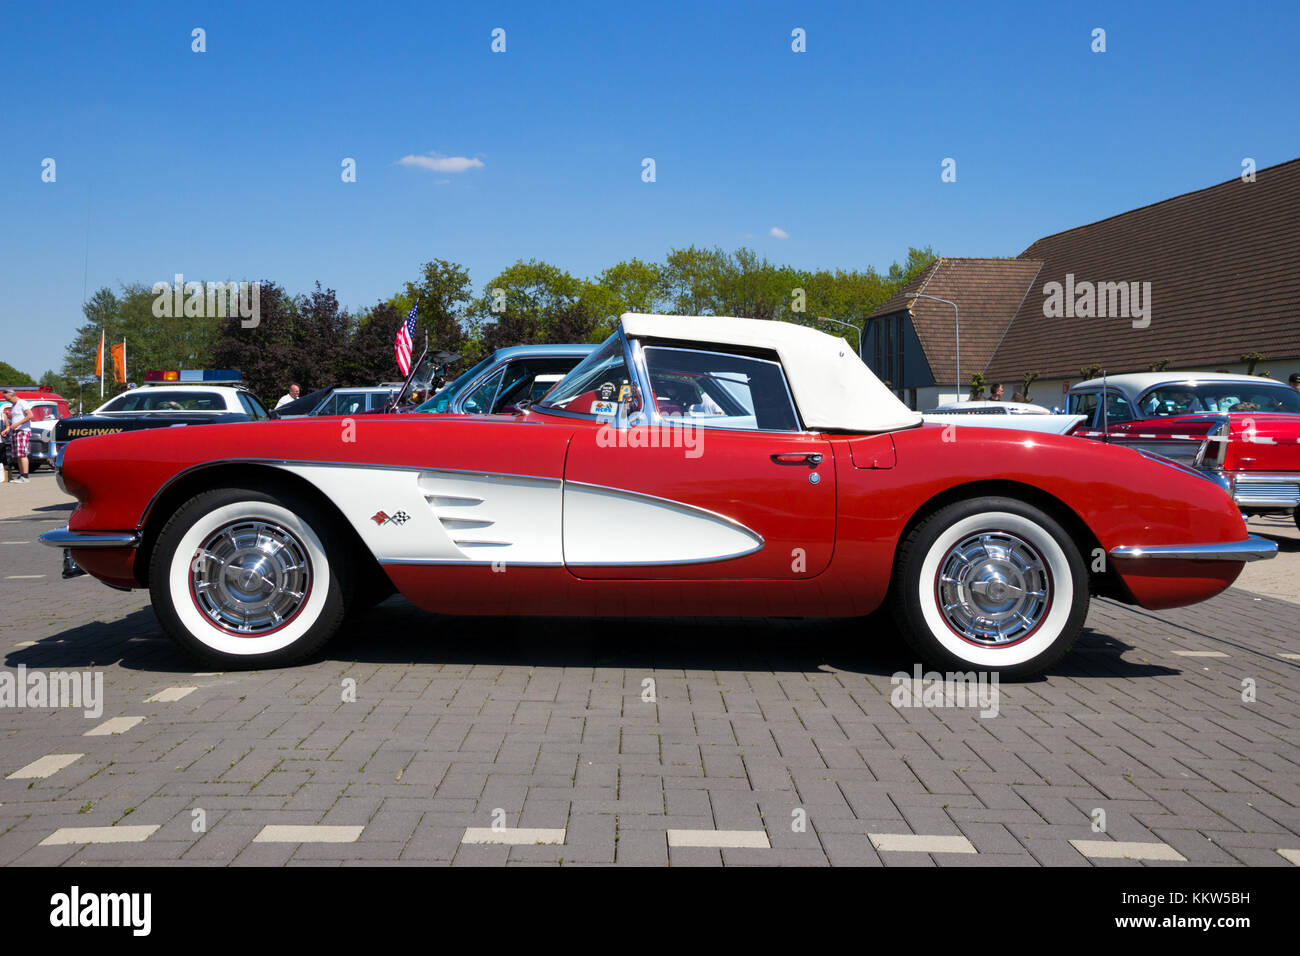 DEN BOSCH, THE NETHERLANDS - MAY 10, 2016: Side view of a parked red and white 1960 Chevrolet Corvette Roadster vintage car. Stock Photo